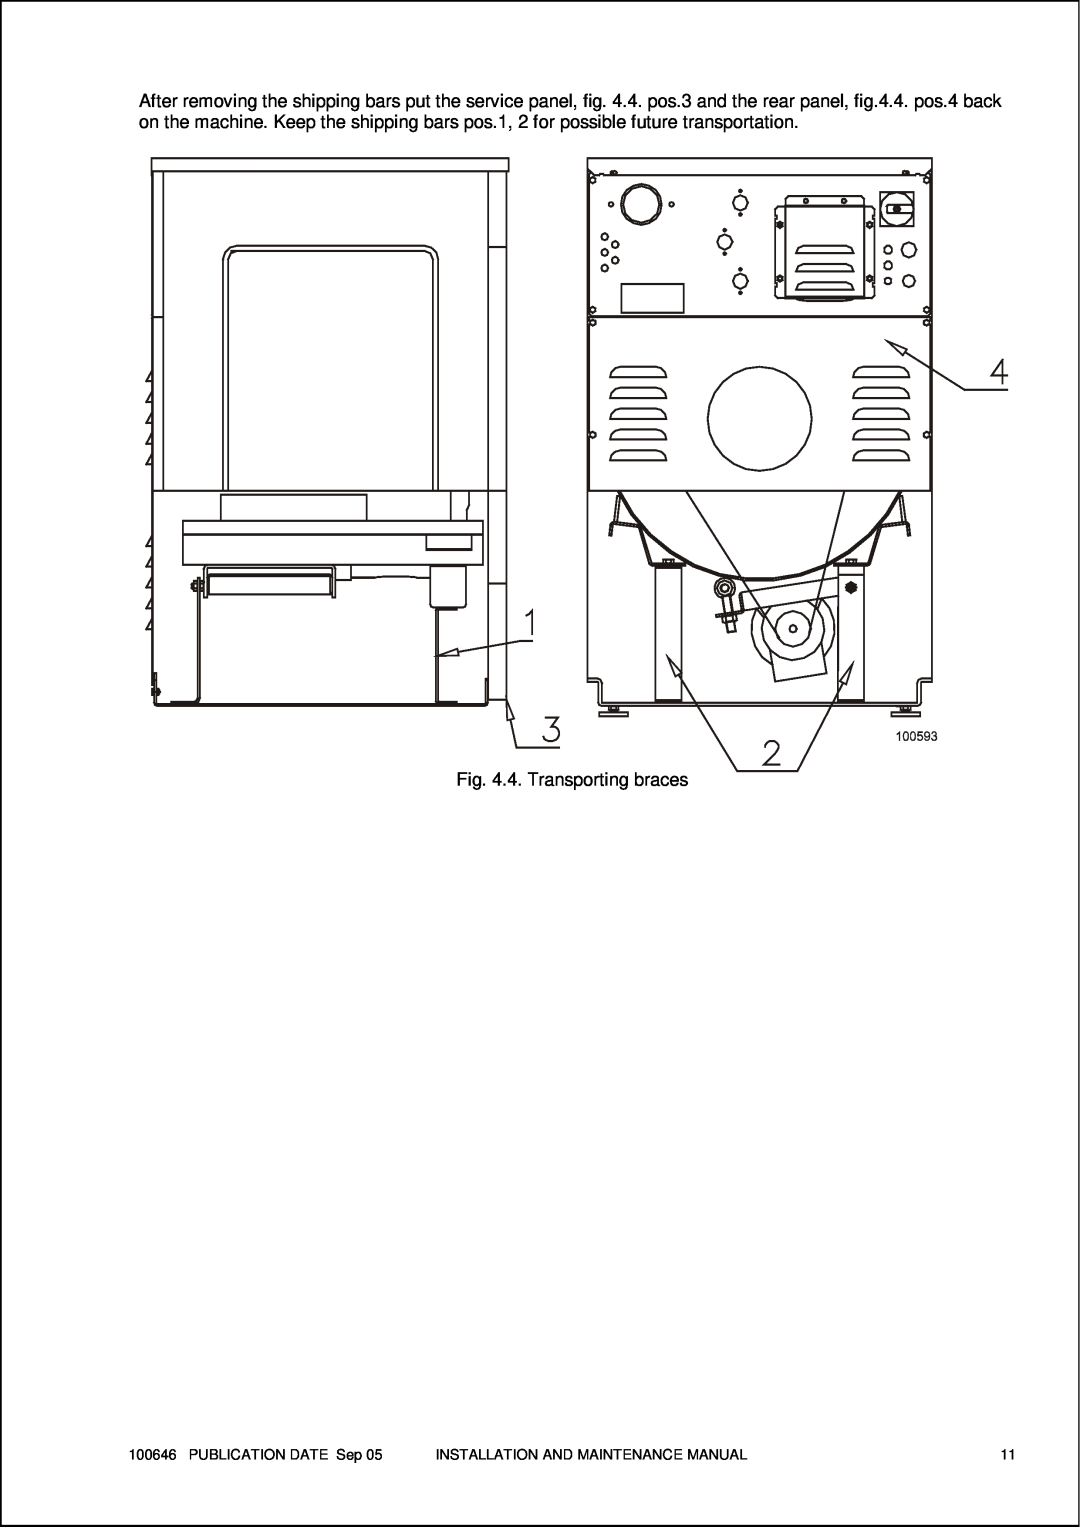 Maytag MFS 25-35 manual 4. Transporting braces, PUBLICATION DATE Sep, Installation And Maintenance Manual 